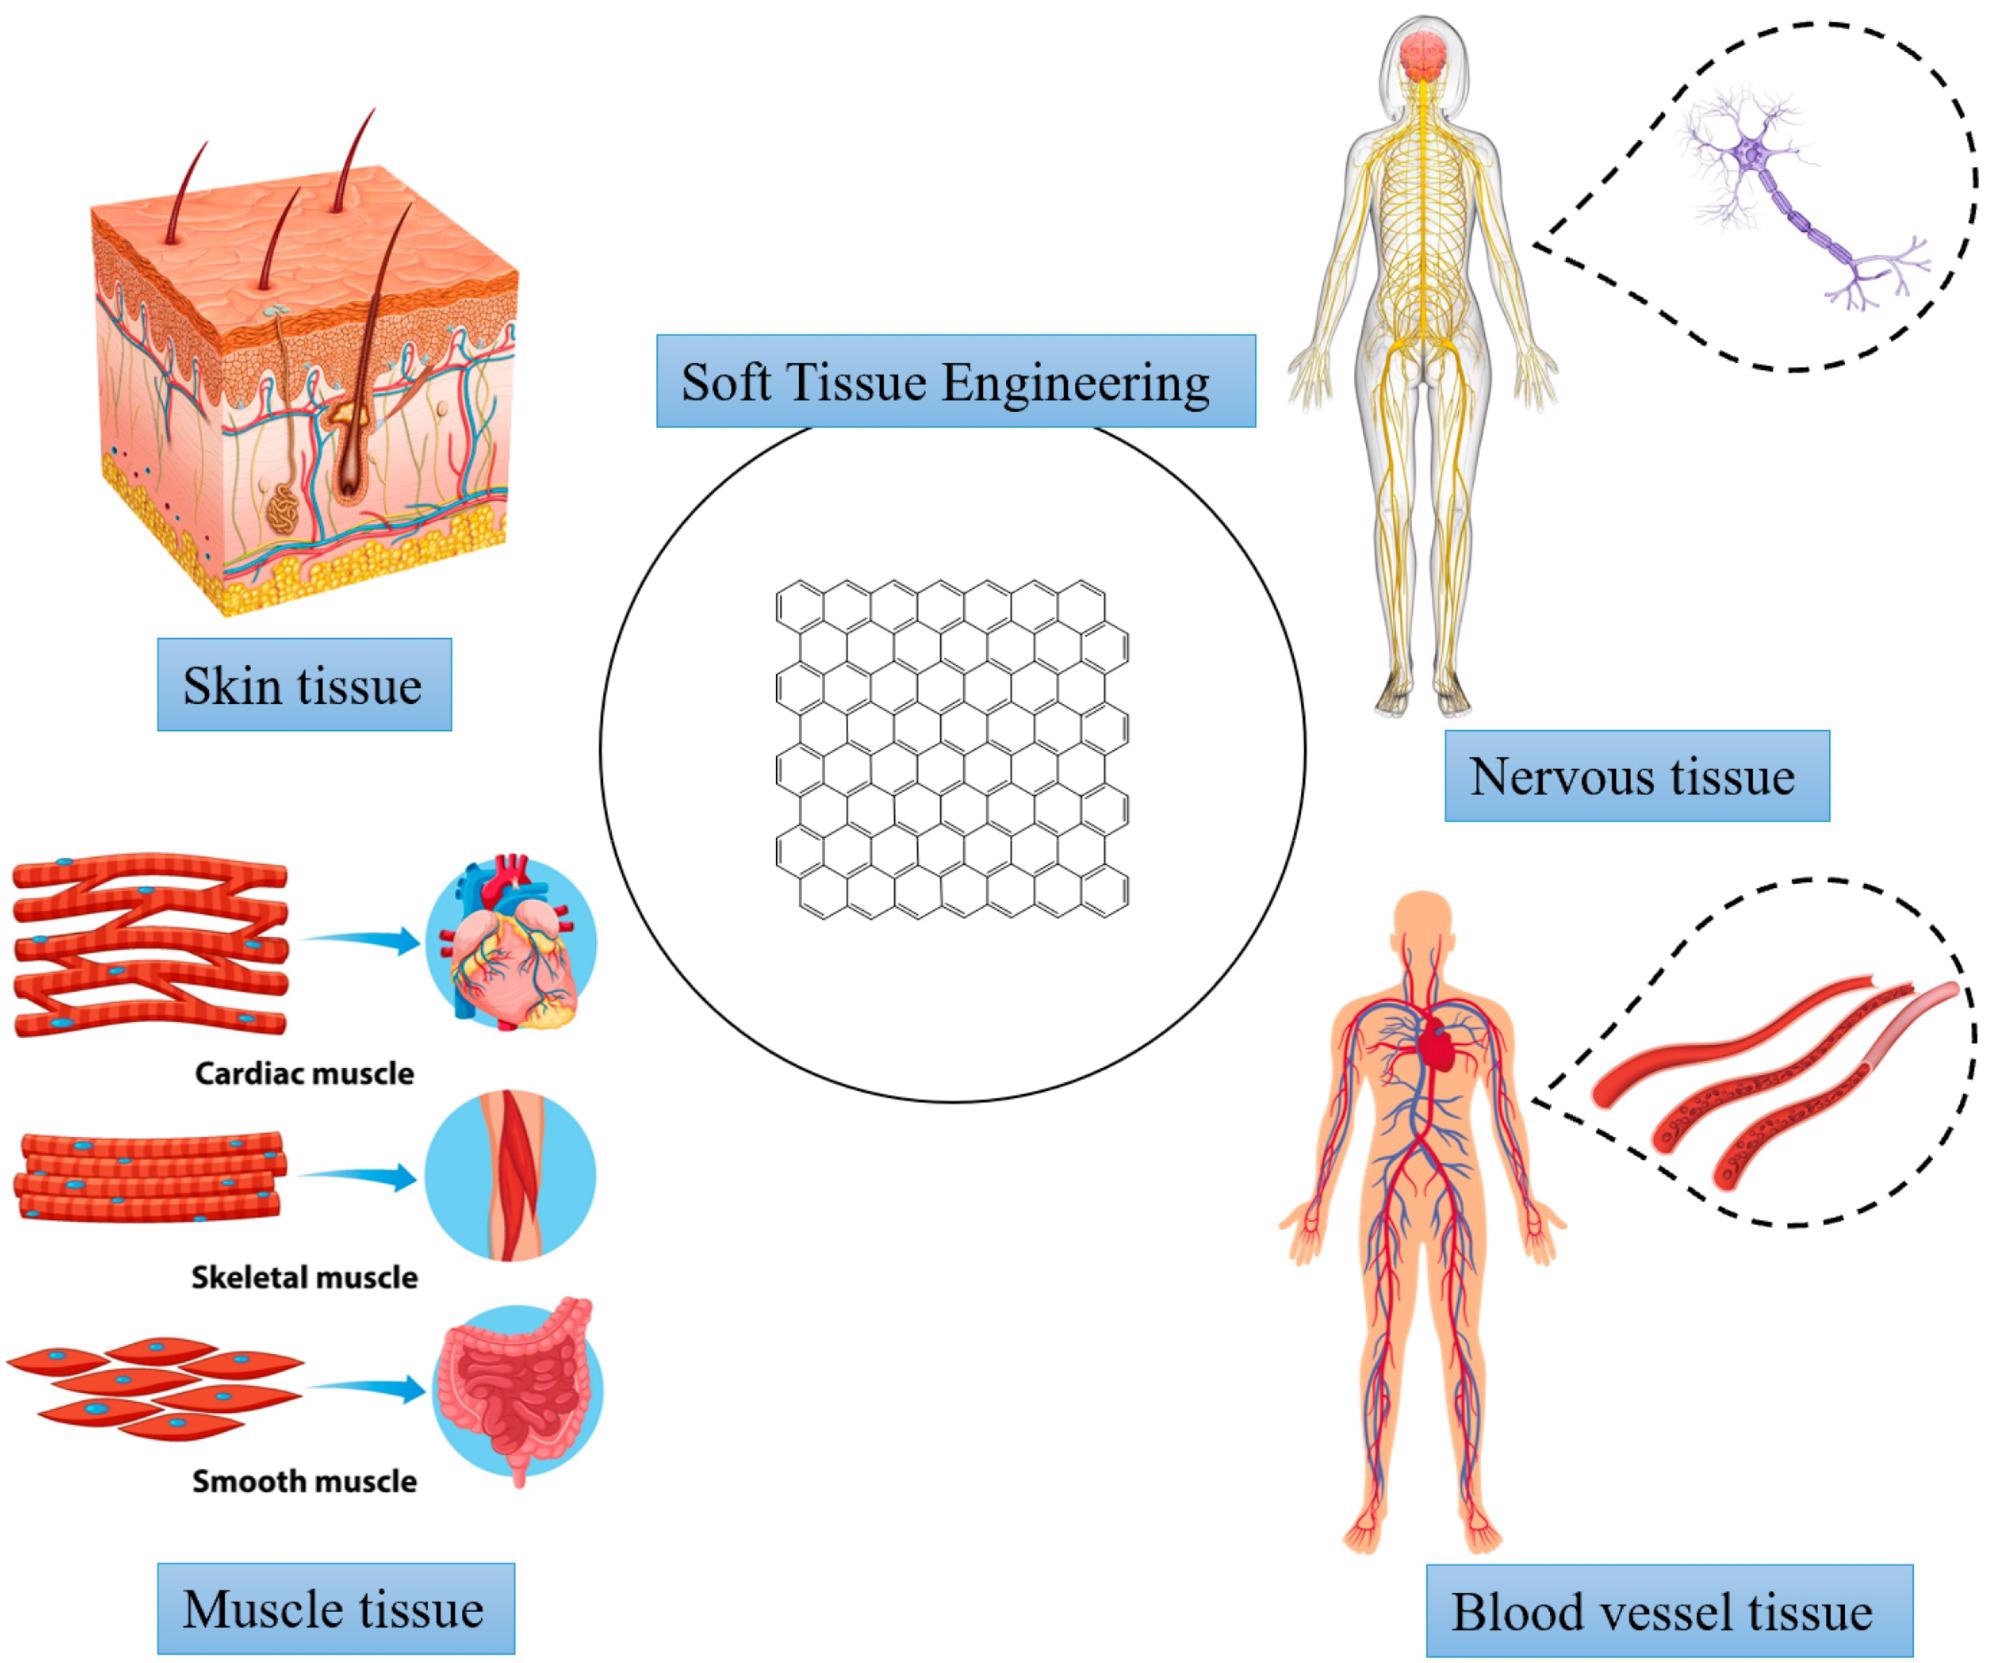 Applications in soft tissue engineering.